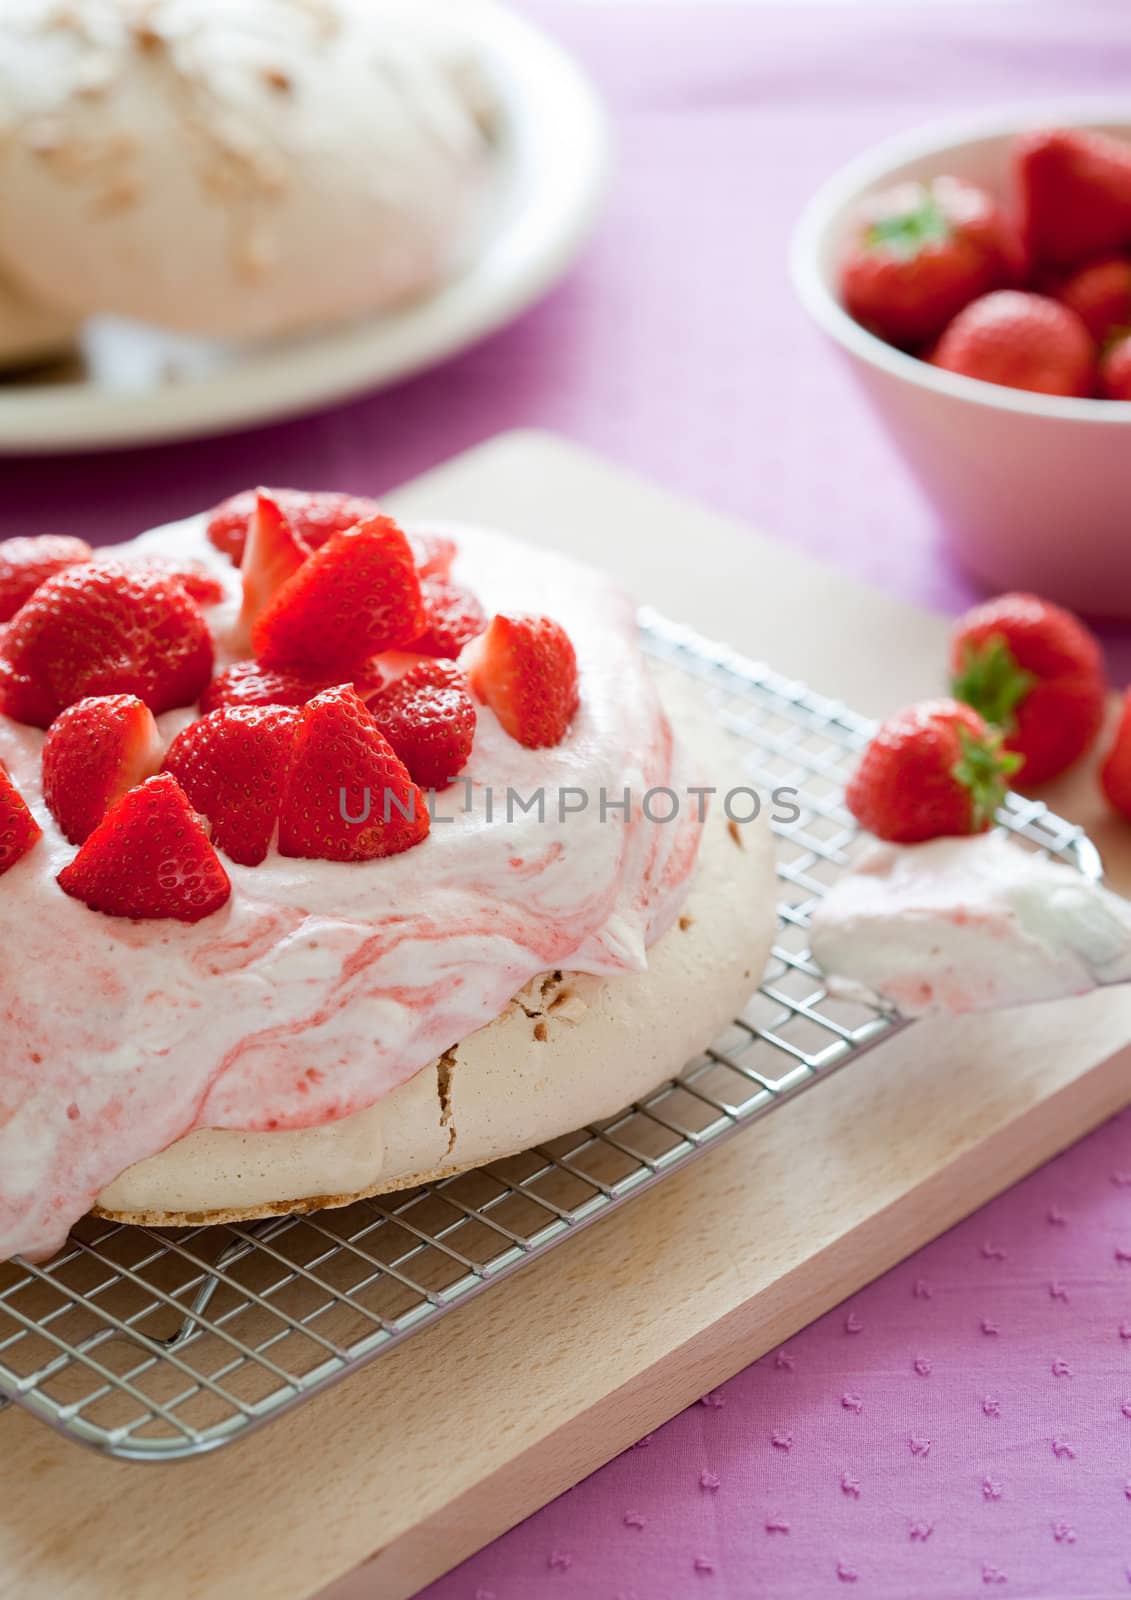 Delicious strawberry pavlova topped with fresh strawberries